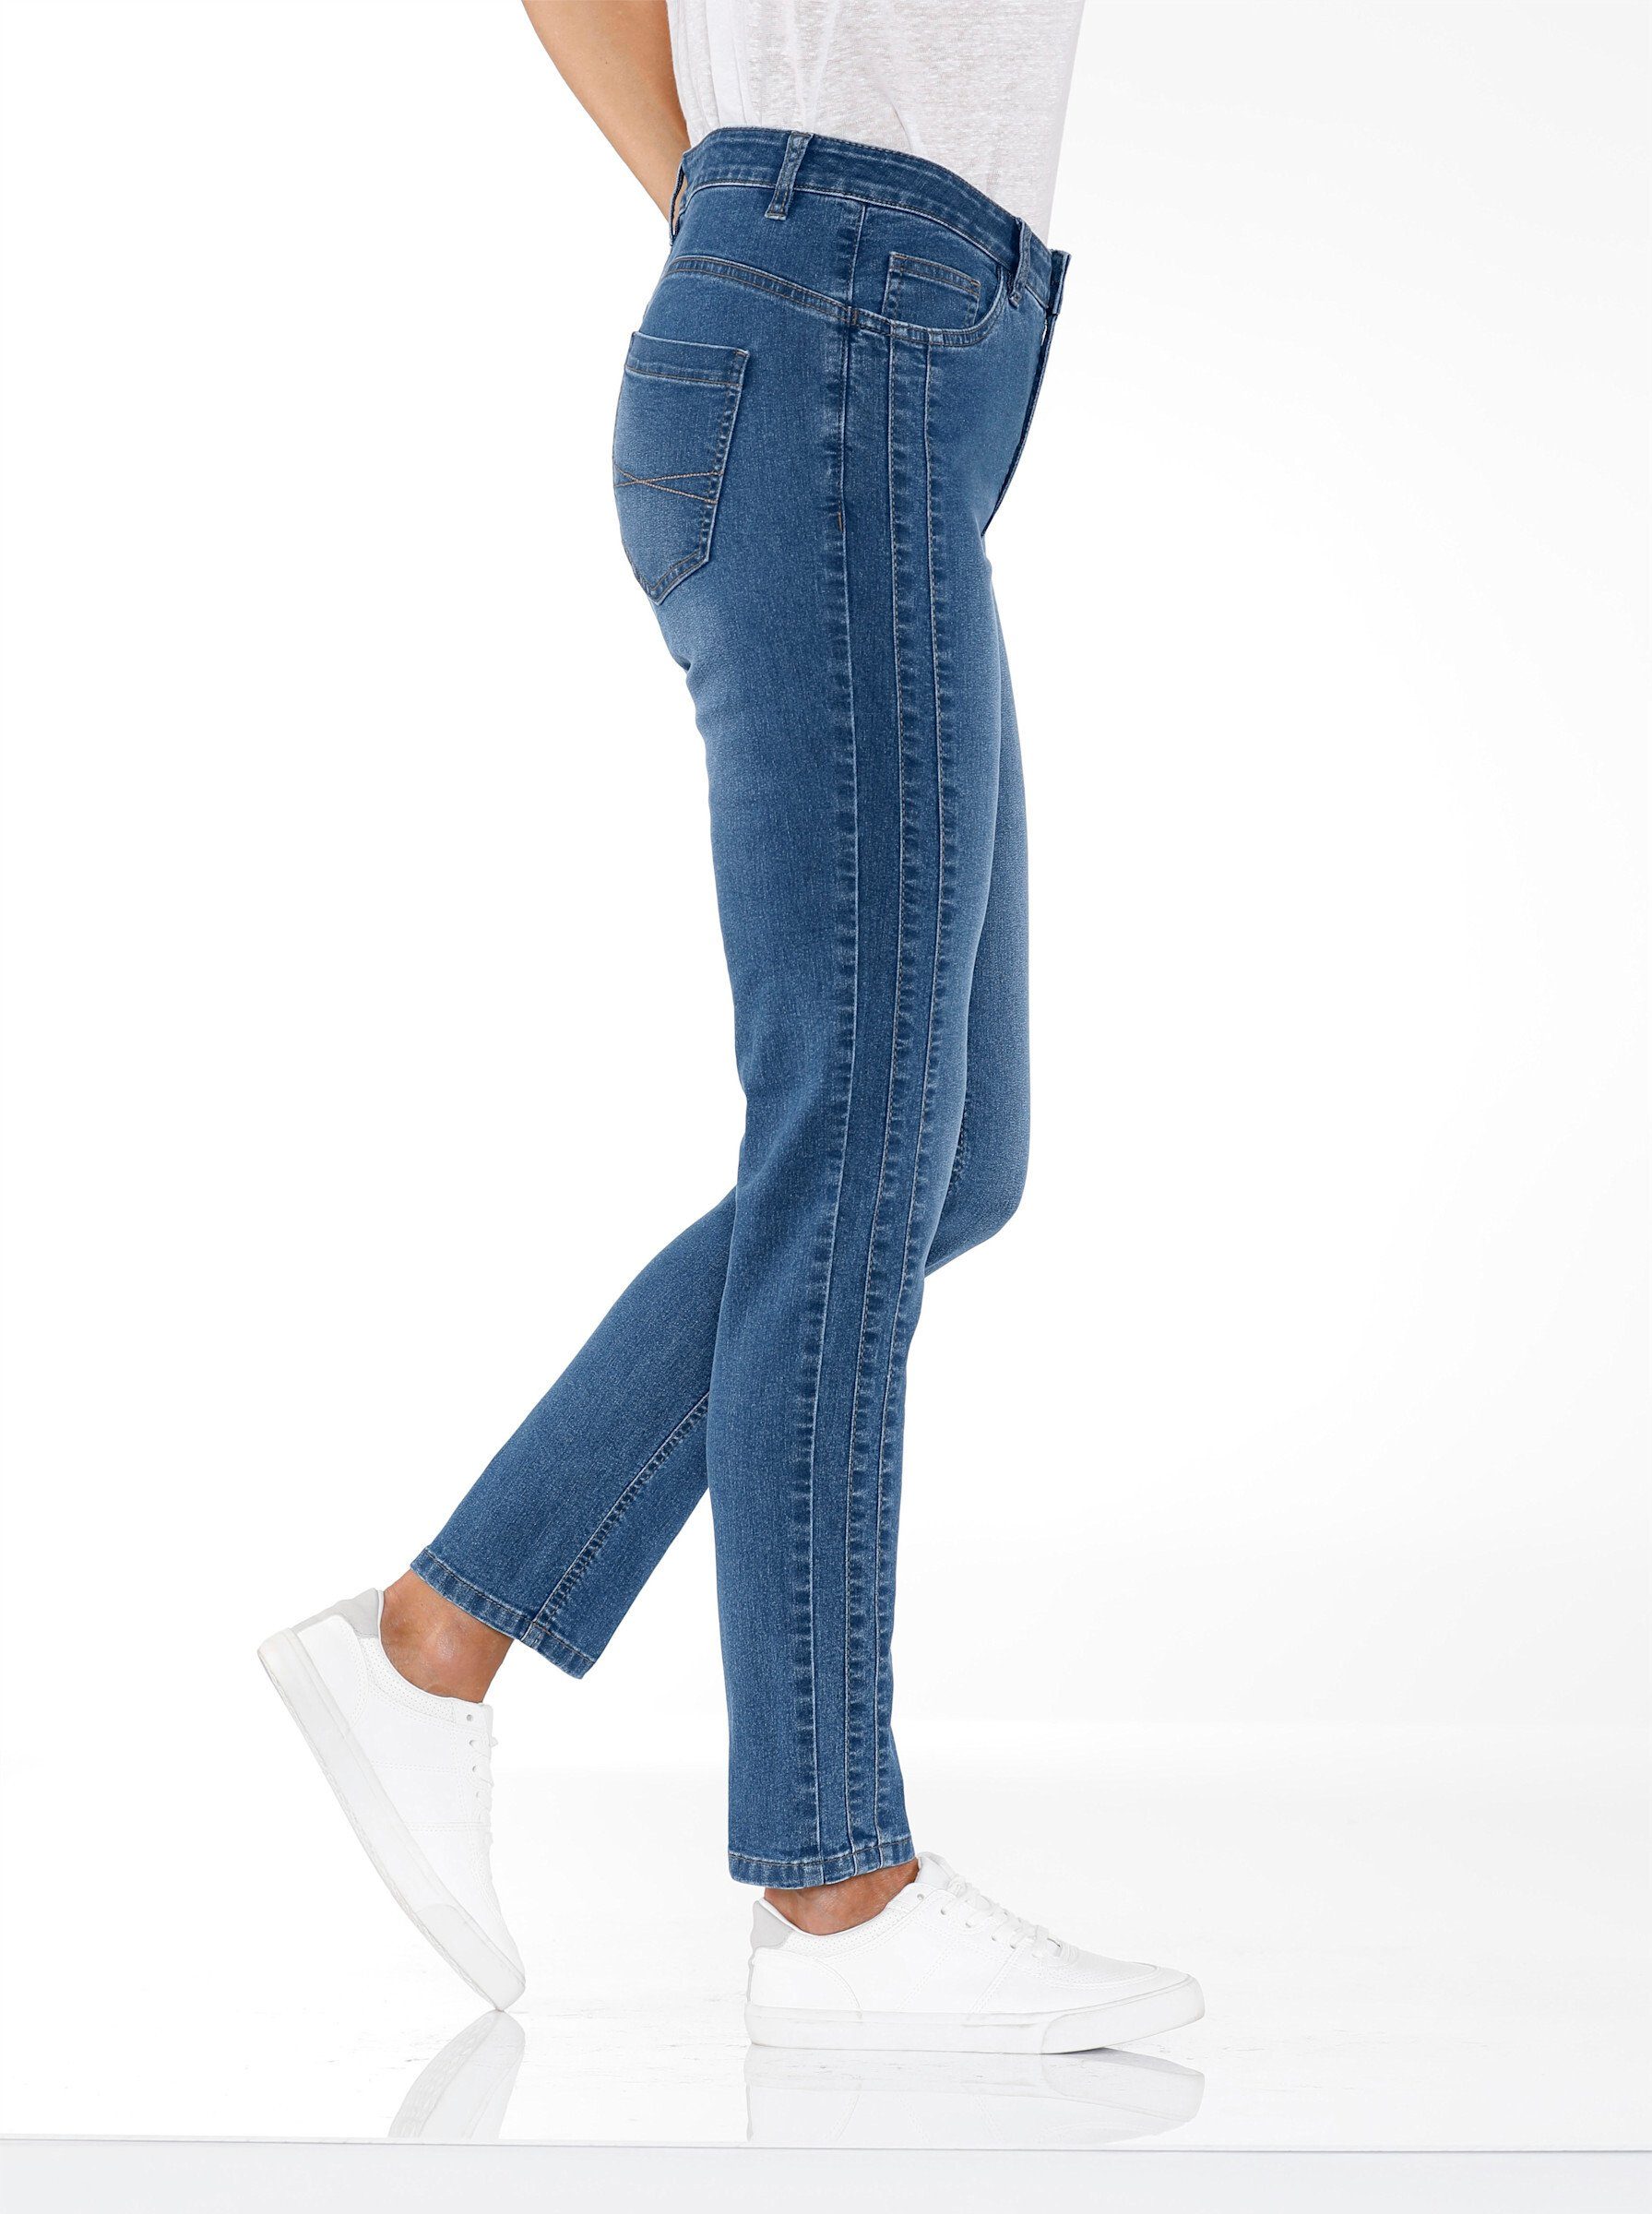 Bequeme blue-stone-washed Jeans Sieh an!